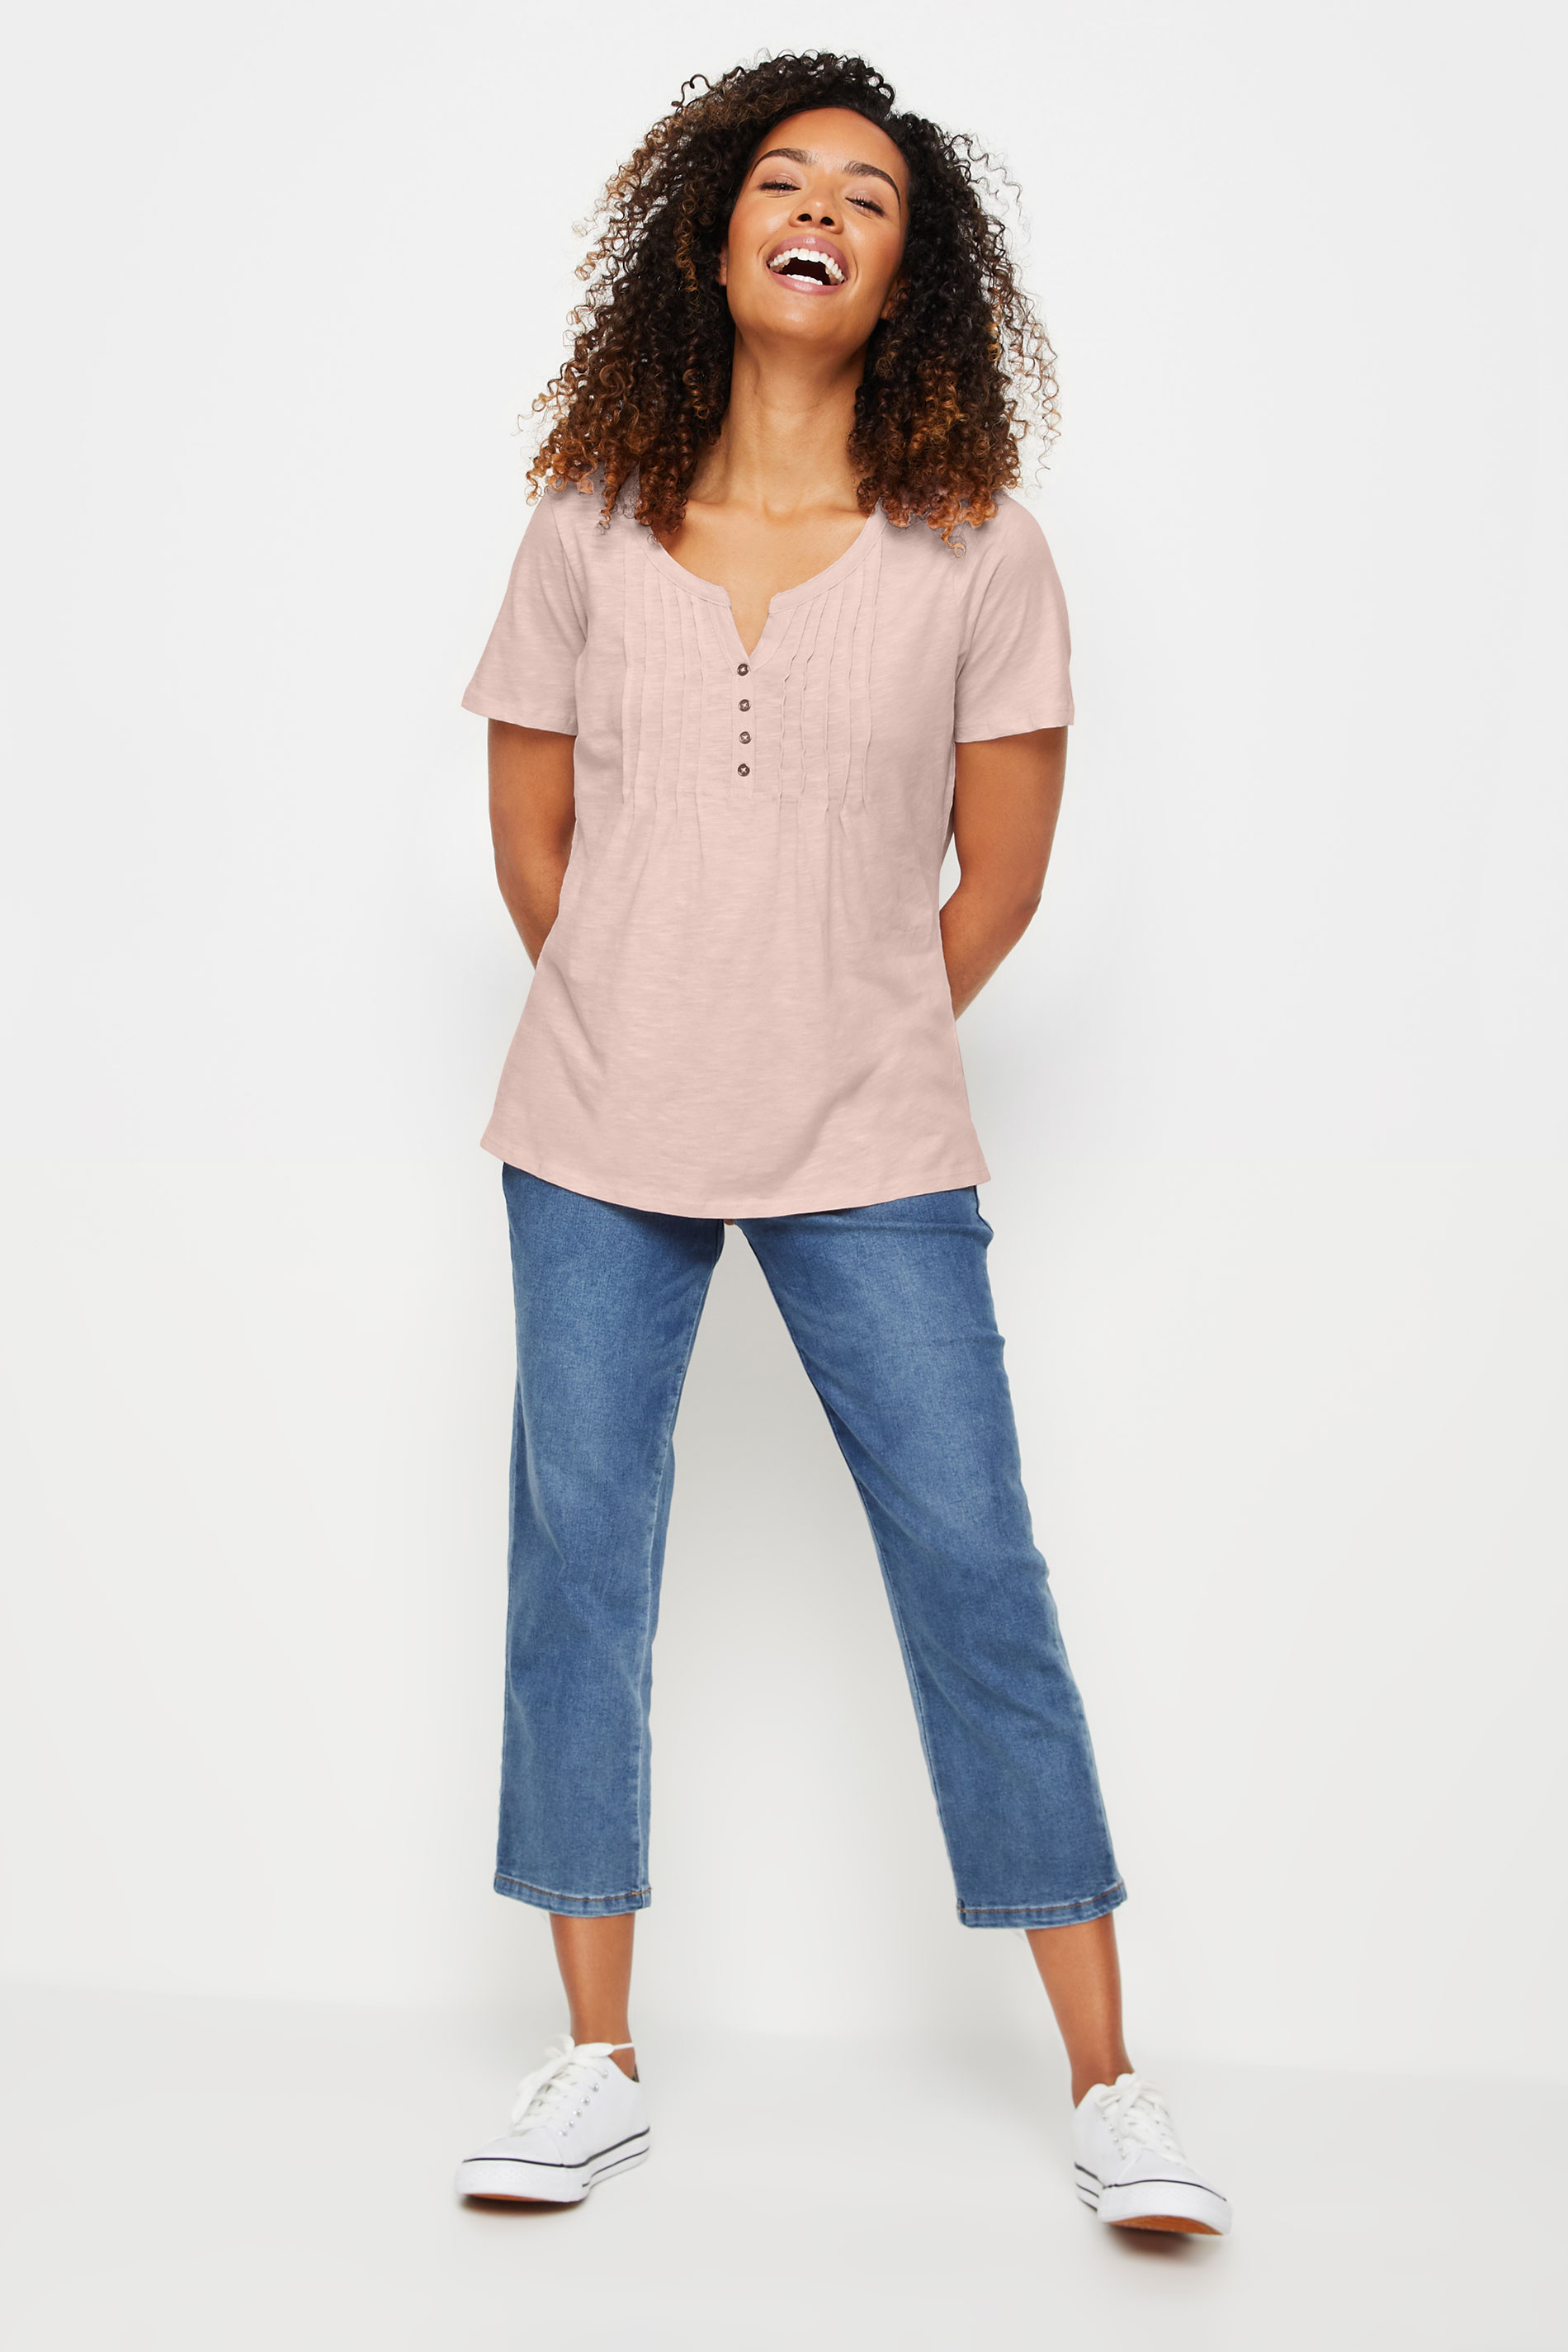 M&Co Pink Cotton Short Sleeve Henley Top | M&Co 2